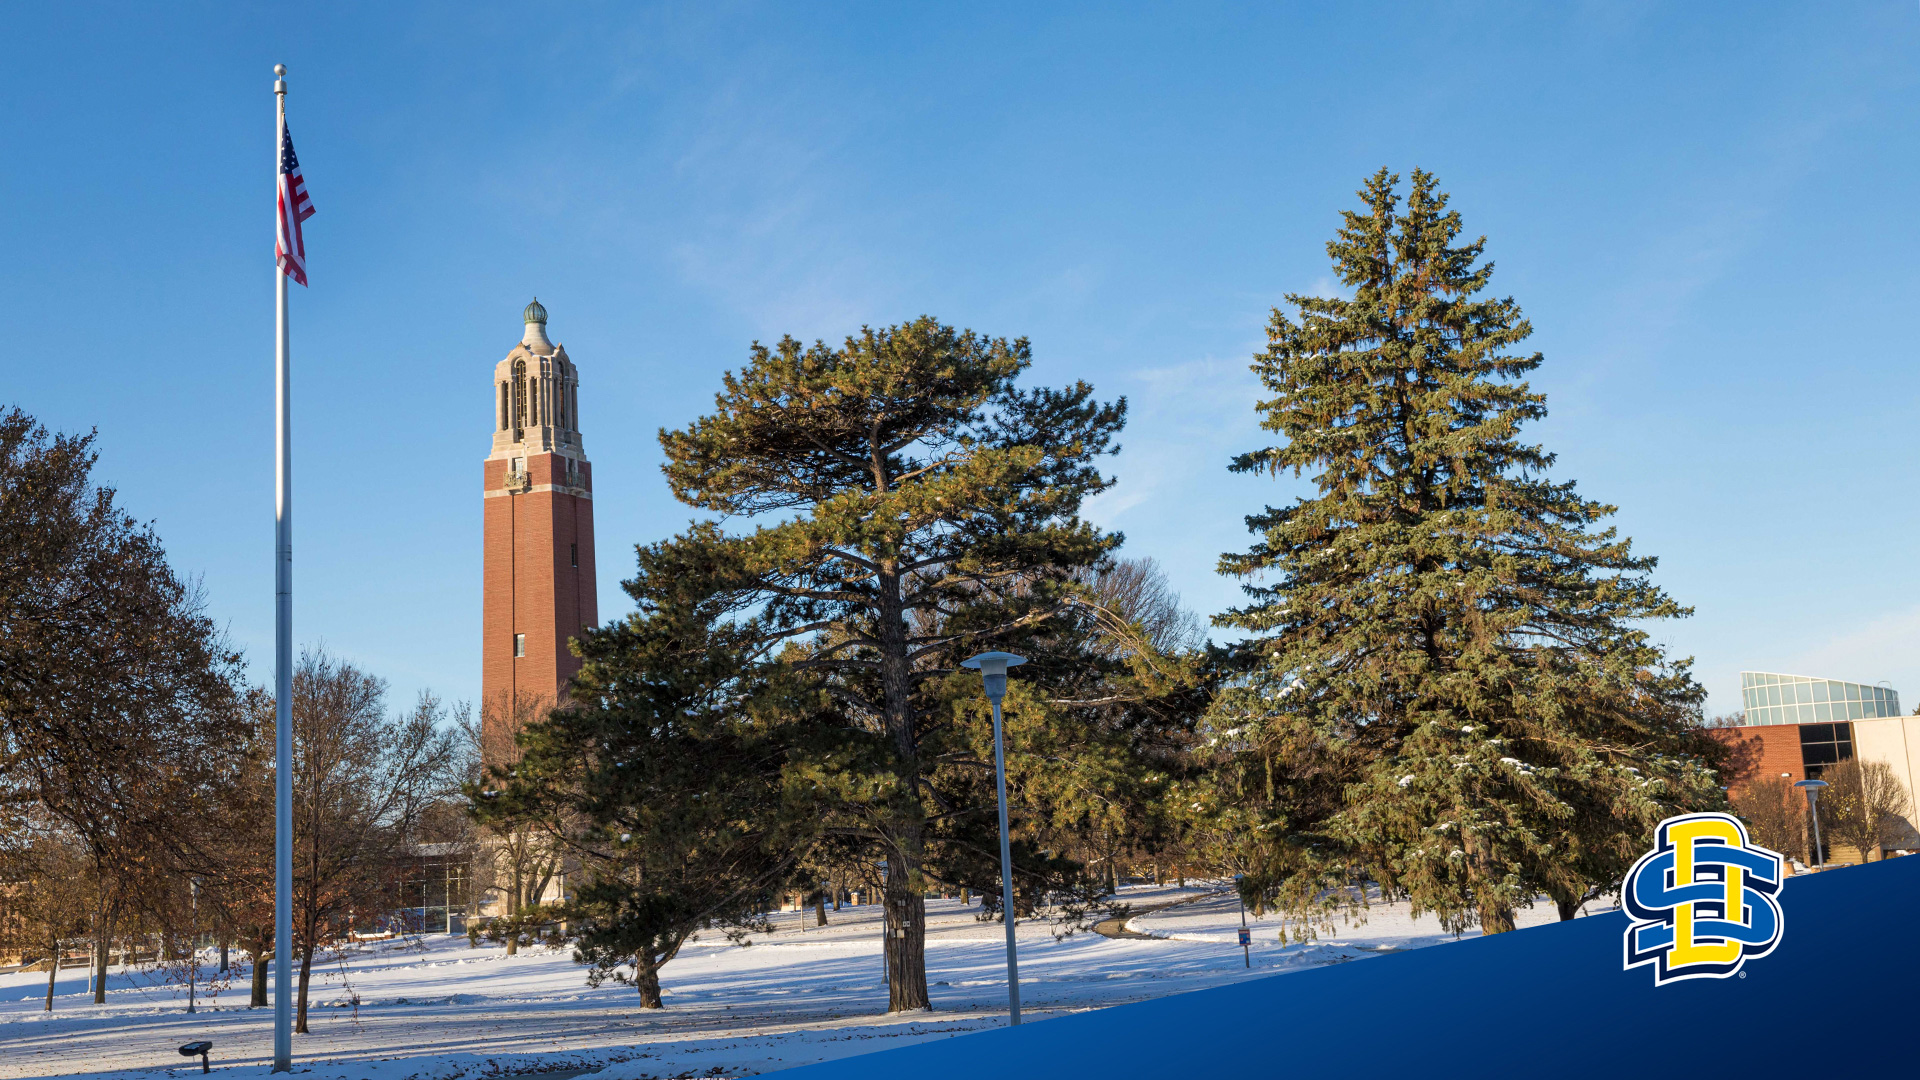 The campanile in the winter covered in frost